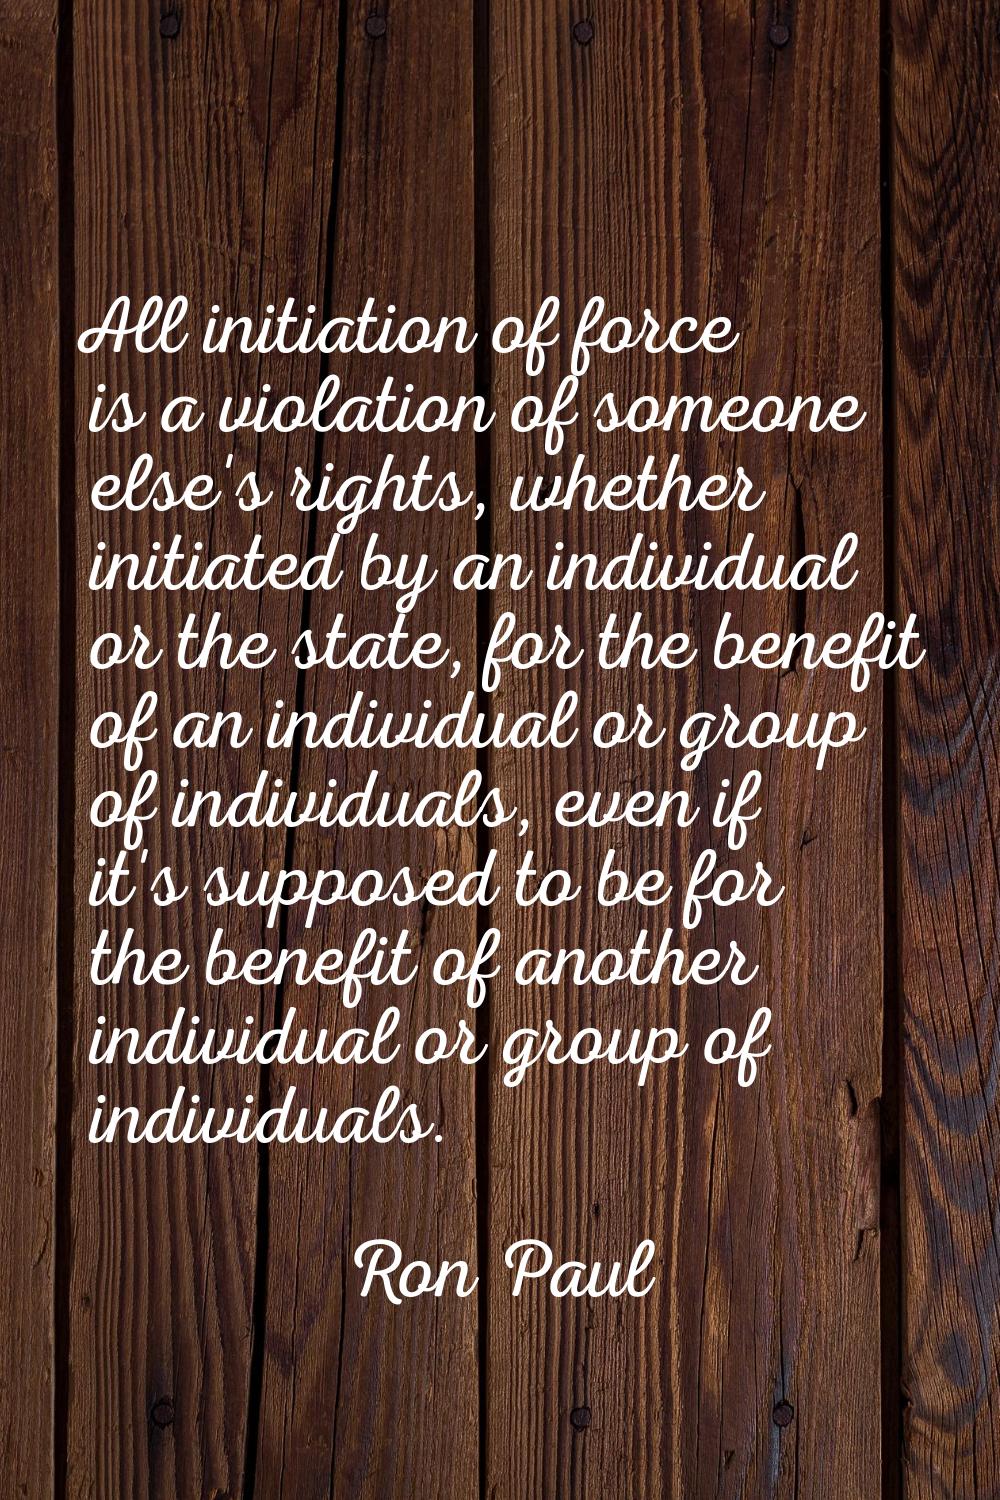 All initiation of force is a violation of someone else's rights, whether initiated by an individual